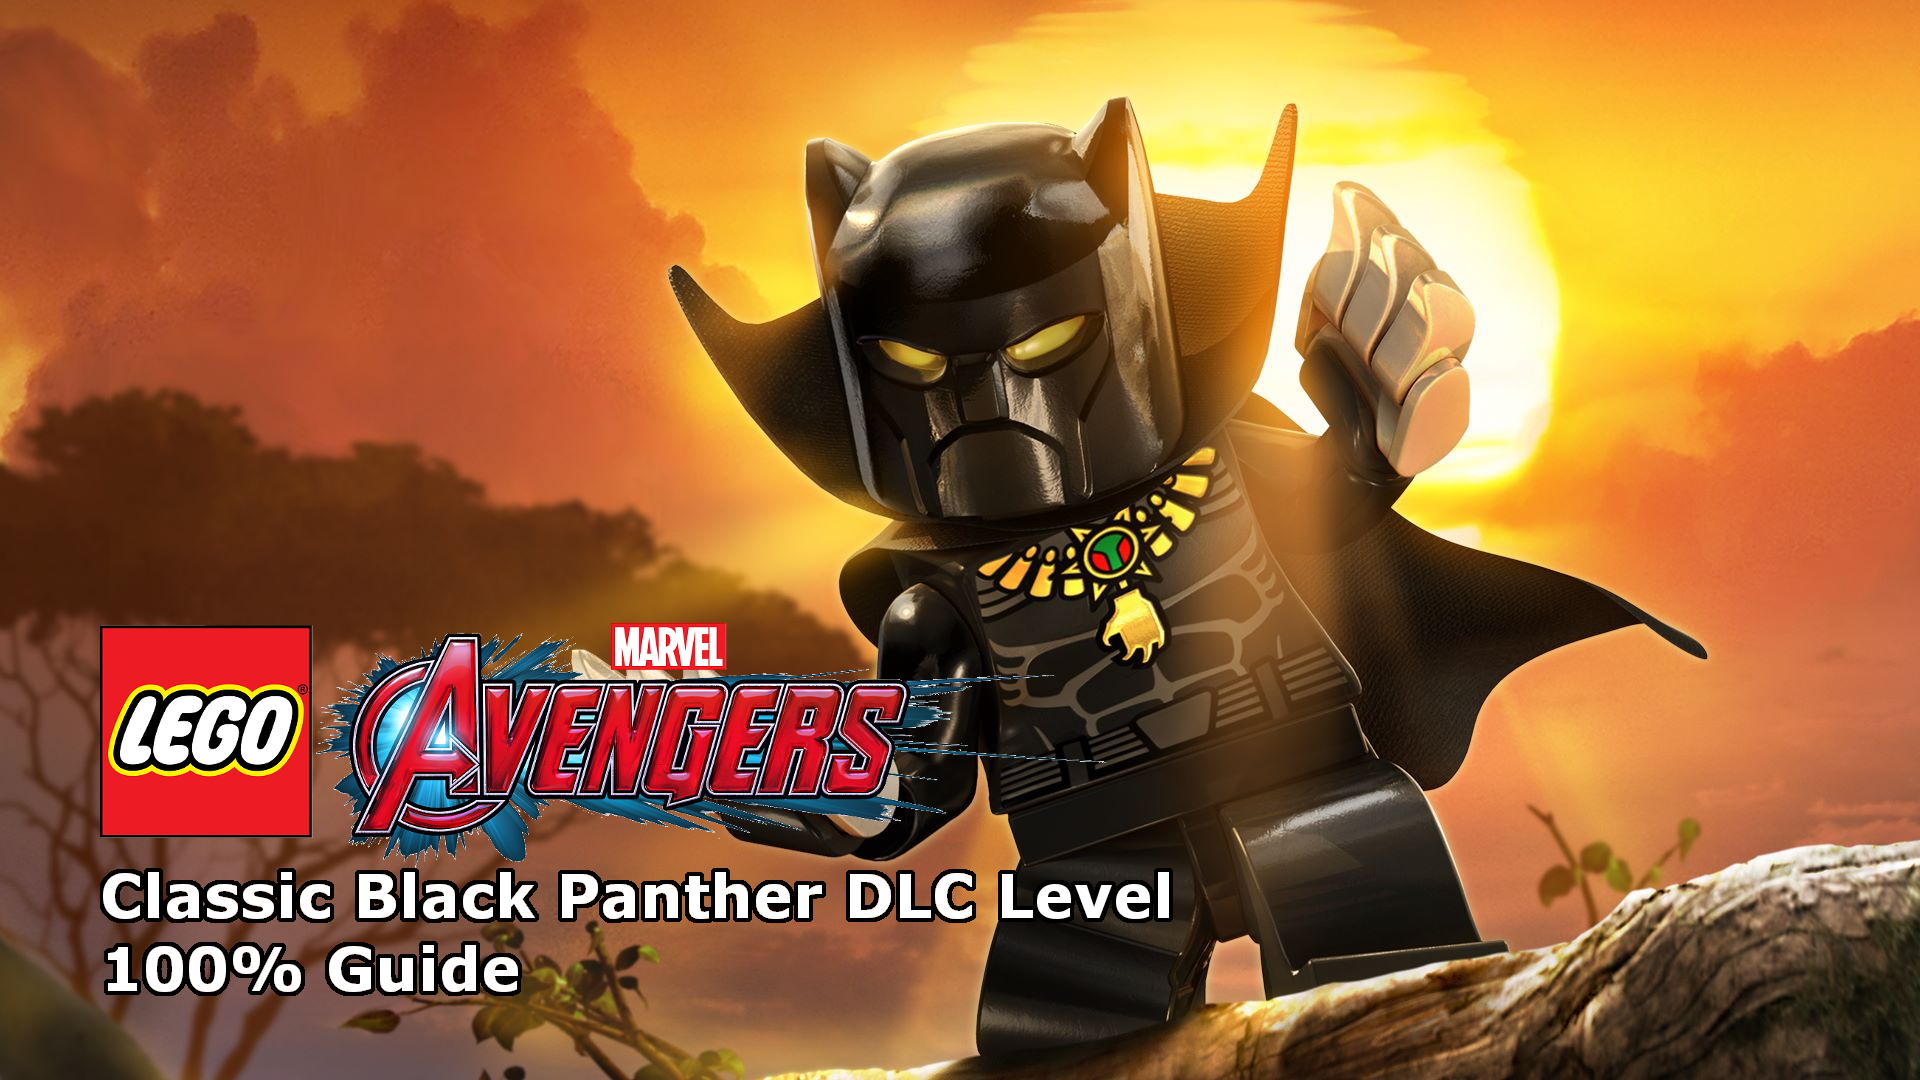 Avengers - Classic Black Panther DLC 100% Guide